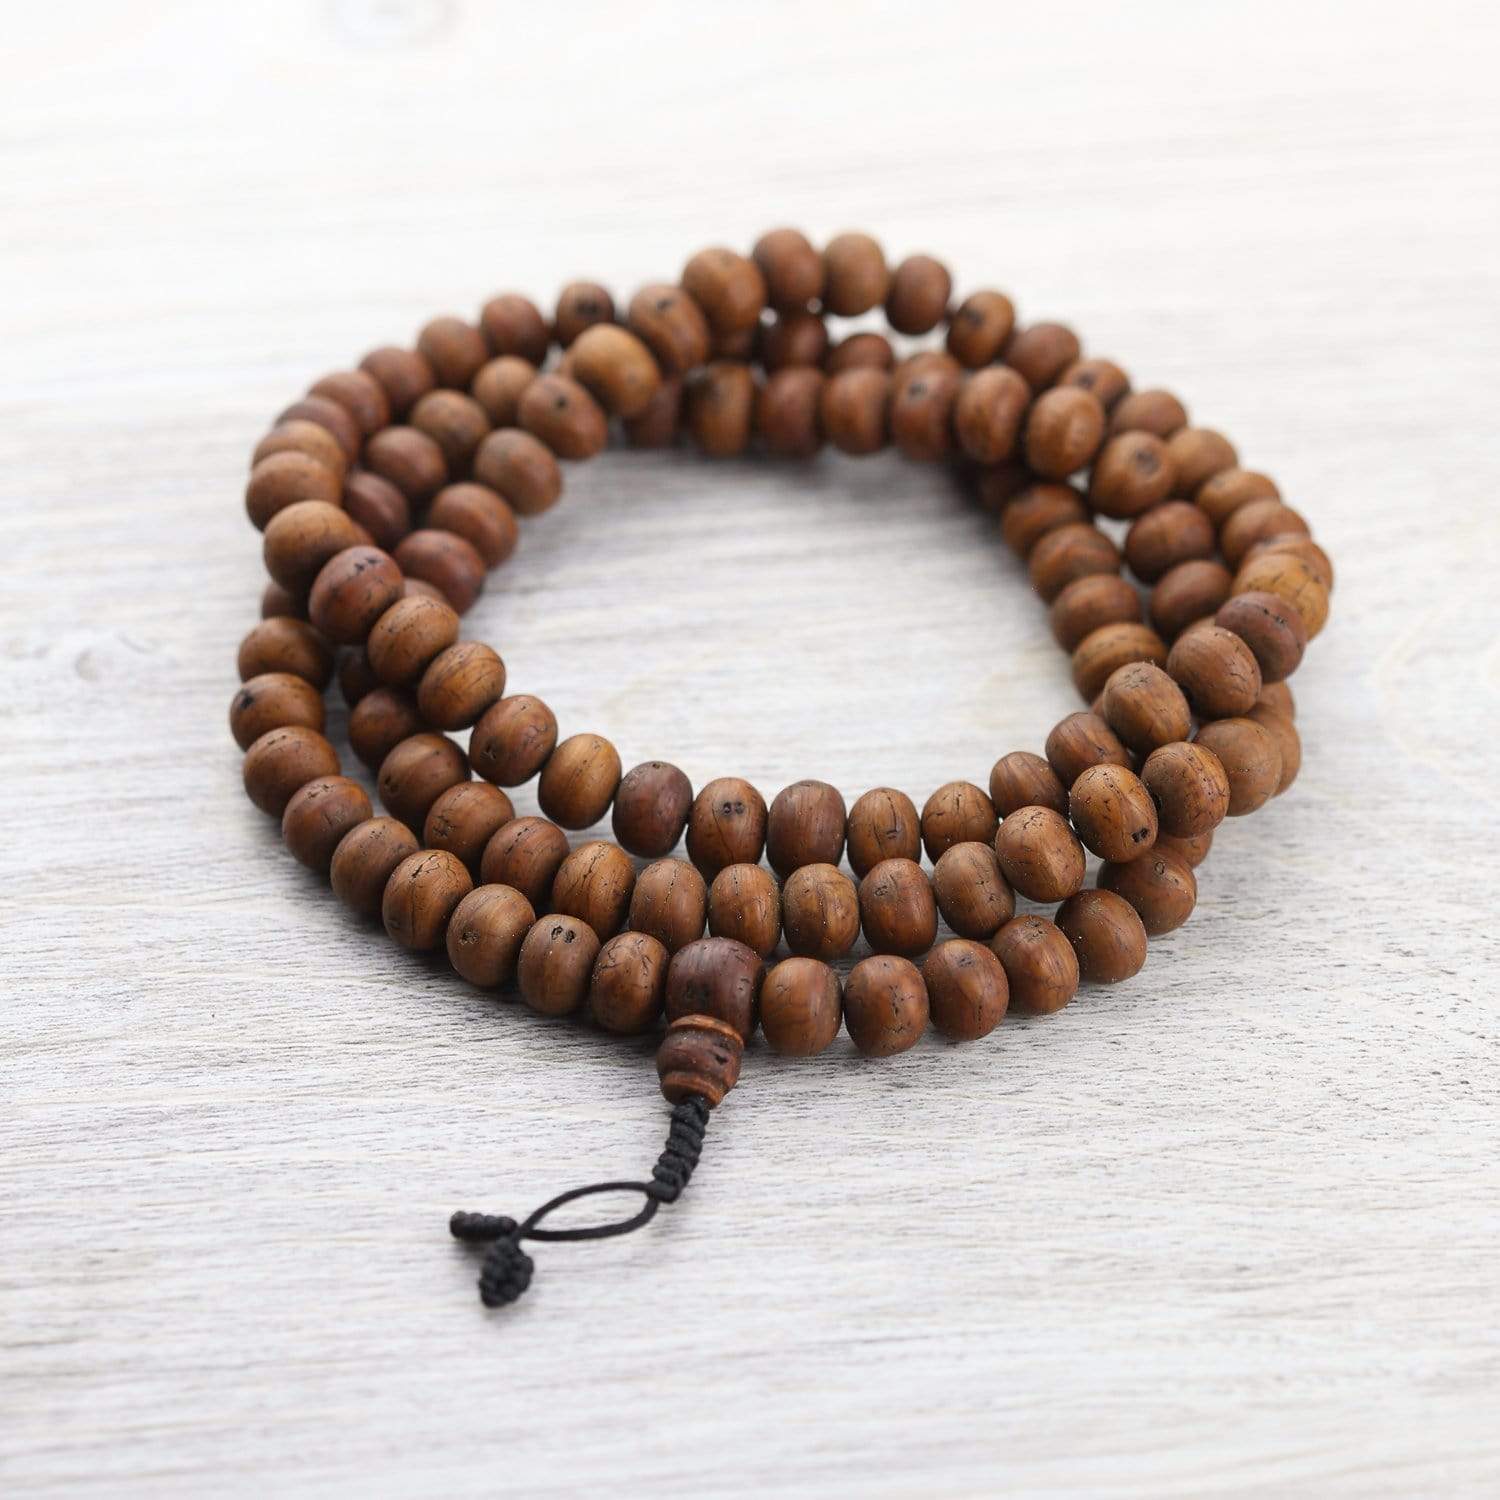 Handmade Natural Boutique Seed Old Bodhi Bracelet With Carved Buddha Wooden  Bead Bracelet And Rosary Strand From Dennisevor, $513.47 | DHgate.Com